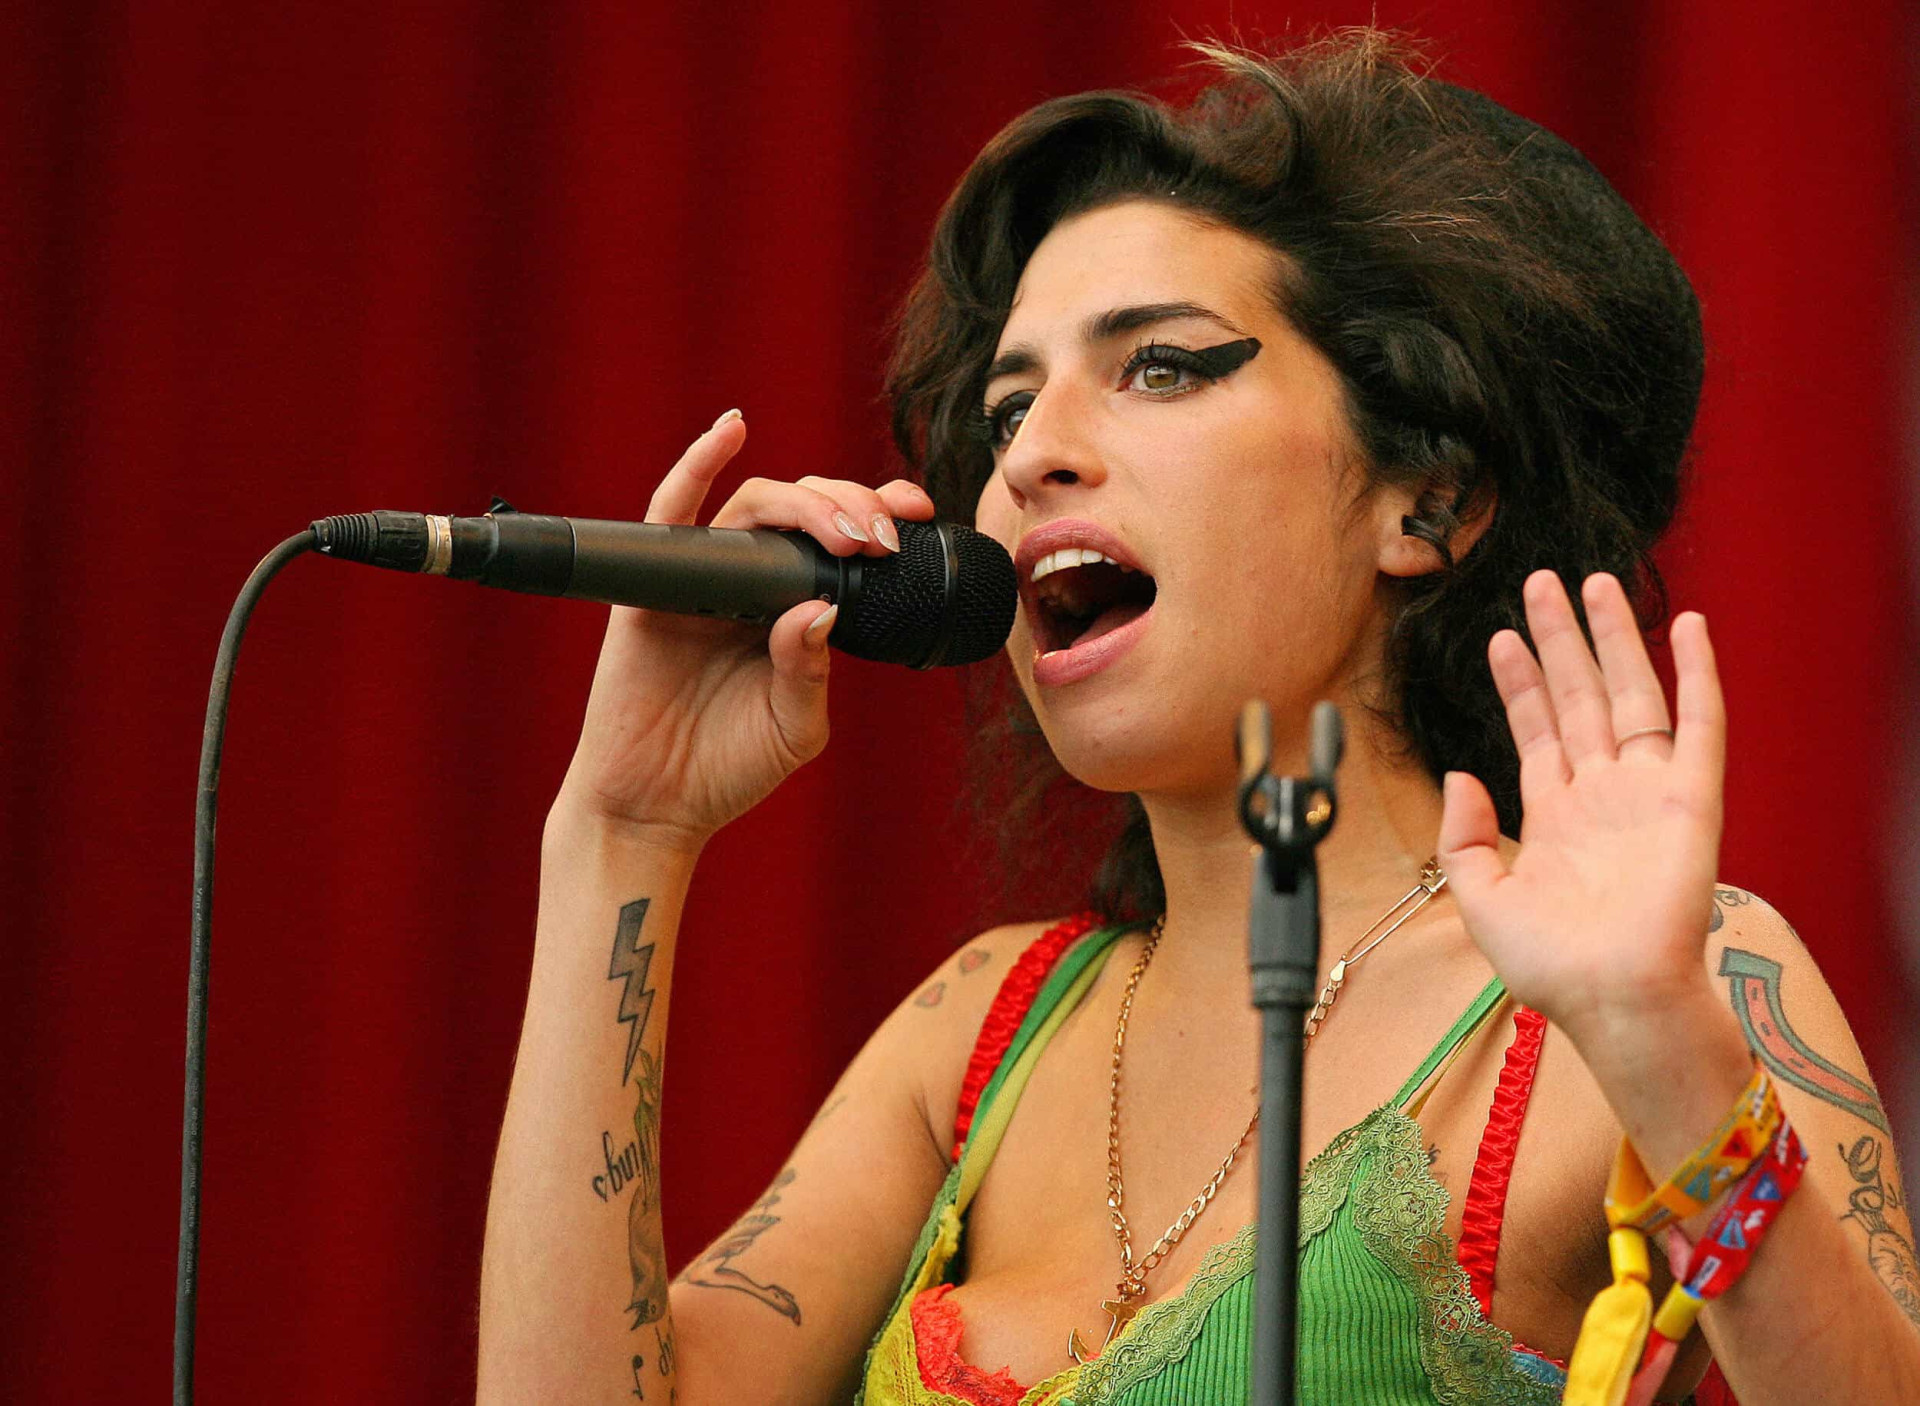 <p>Far and away the most famous and sorely missed jazz singer of the 21st century, Amy Winehouse reached superstar status practically overnight. During her tragically short life, she revitalized the art of jazz singers and made it mainstream. Her influence on popular music can still be felt today.</p><p><a href="https://www.msn.com/en-sg/community/channel/vid-7xx8mnucu55yw63we9va2gwr7uihbxwc68fxqp25x6tg4ftibpra?cvid=94631541bc0f4f89bfd59158d696ad7e">Follow us and access great exclusive content every day</a></p>